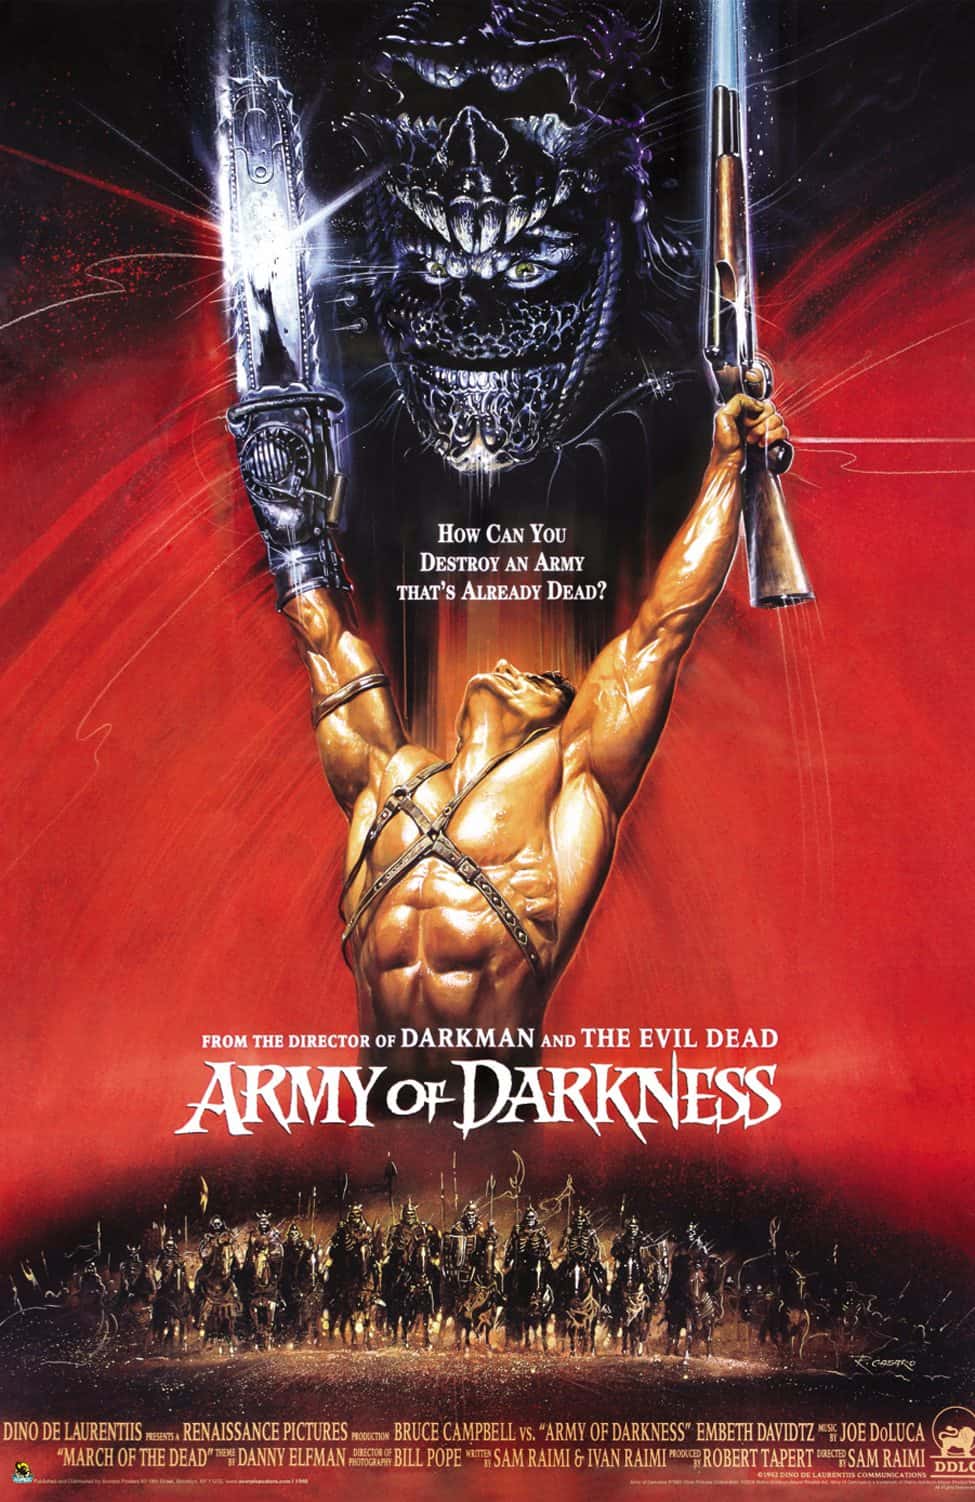 Horror Movie Review: Army of Darkness (1992)